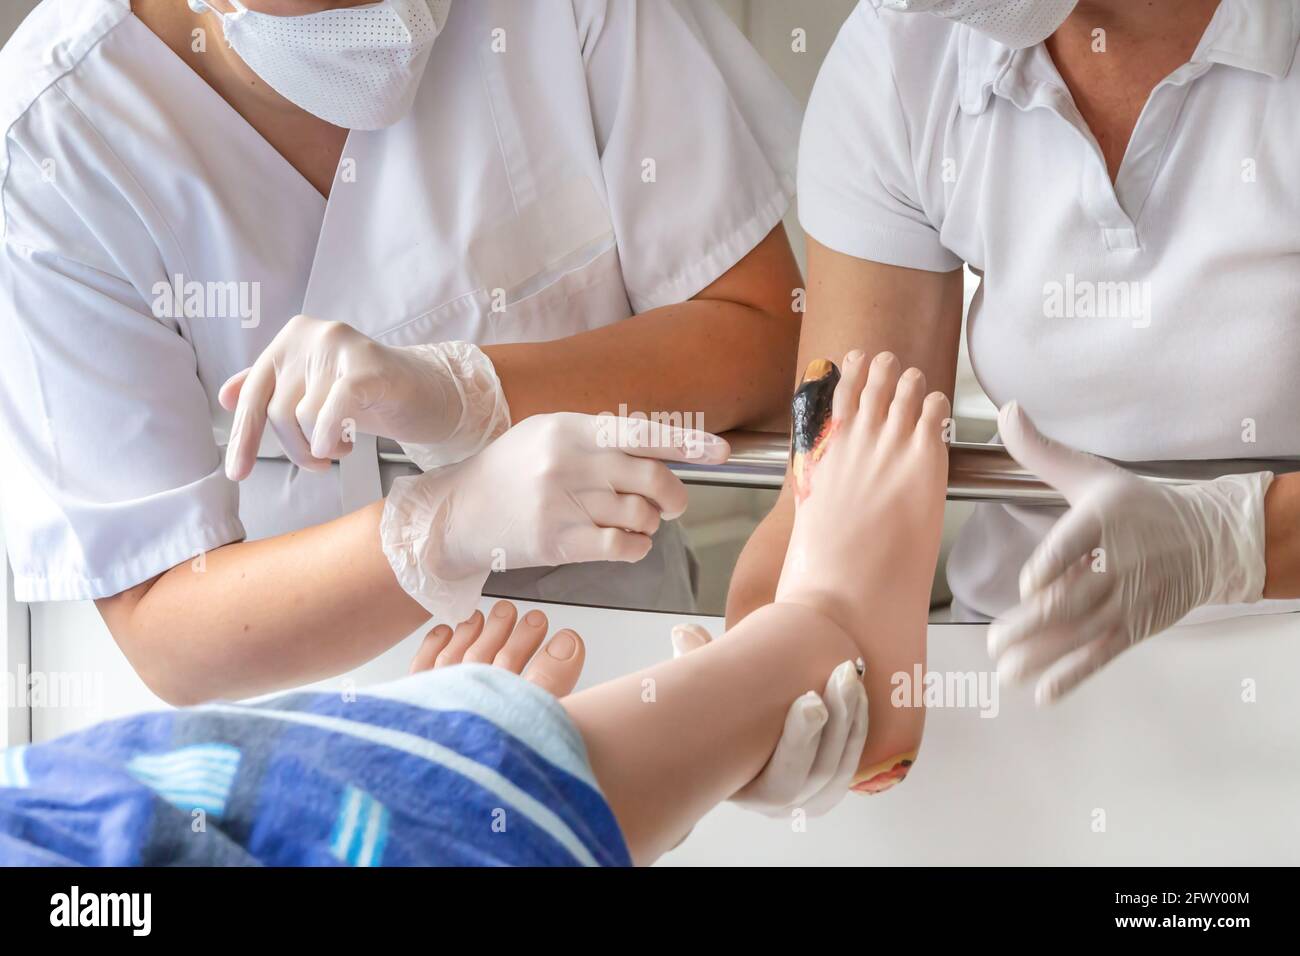 Two education nurses demonstrating screening and observation of wounds with help of a nursing puppet Stock Photo